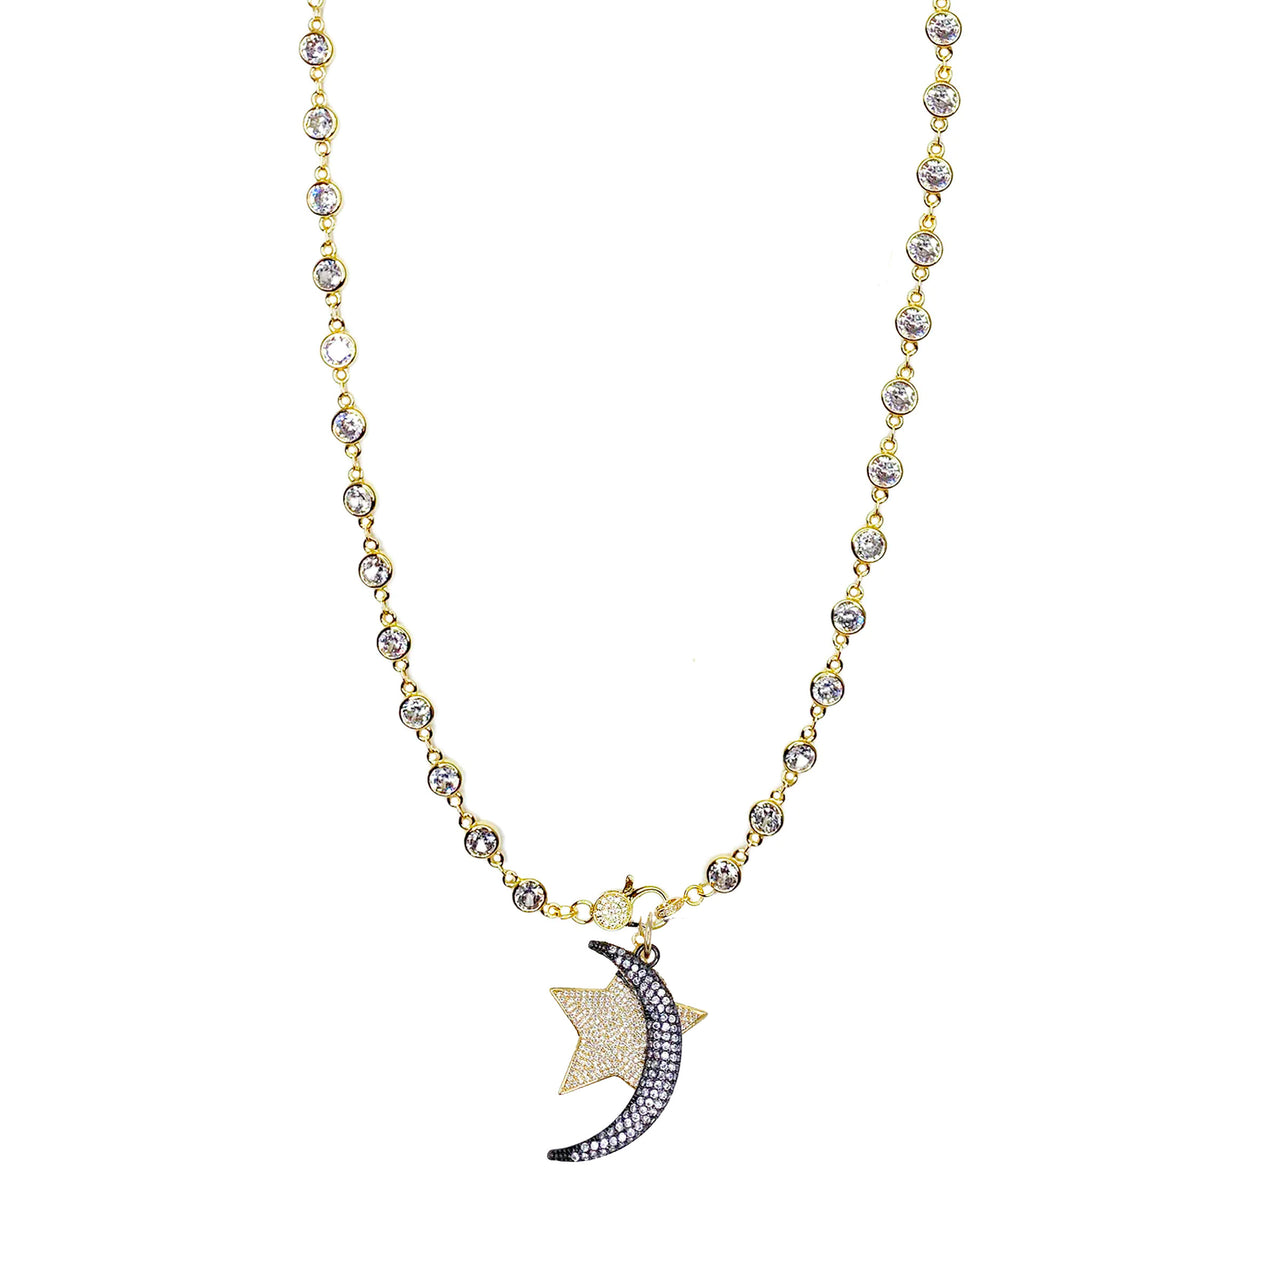 Danielle's Love You To The Moon Necklace